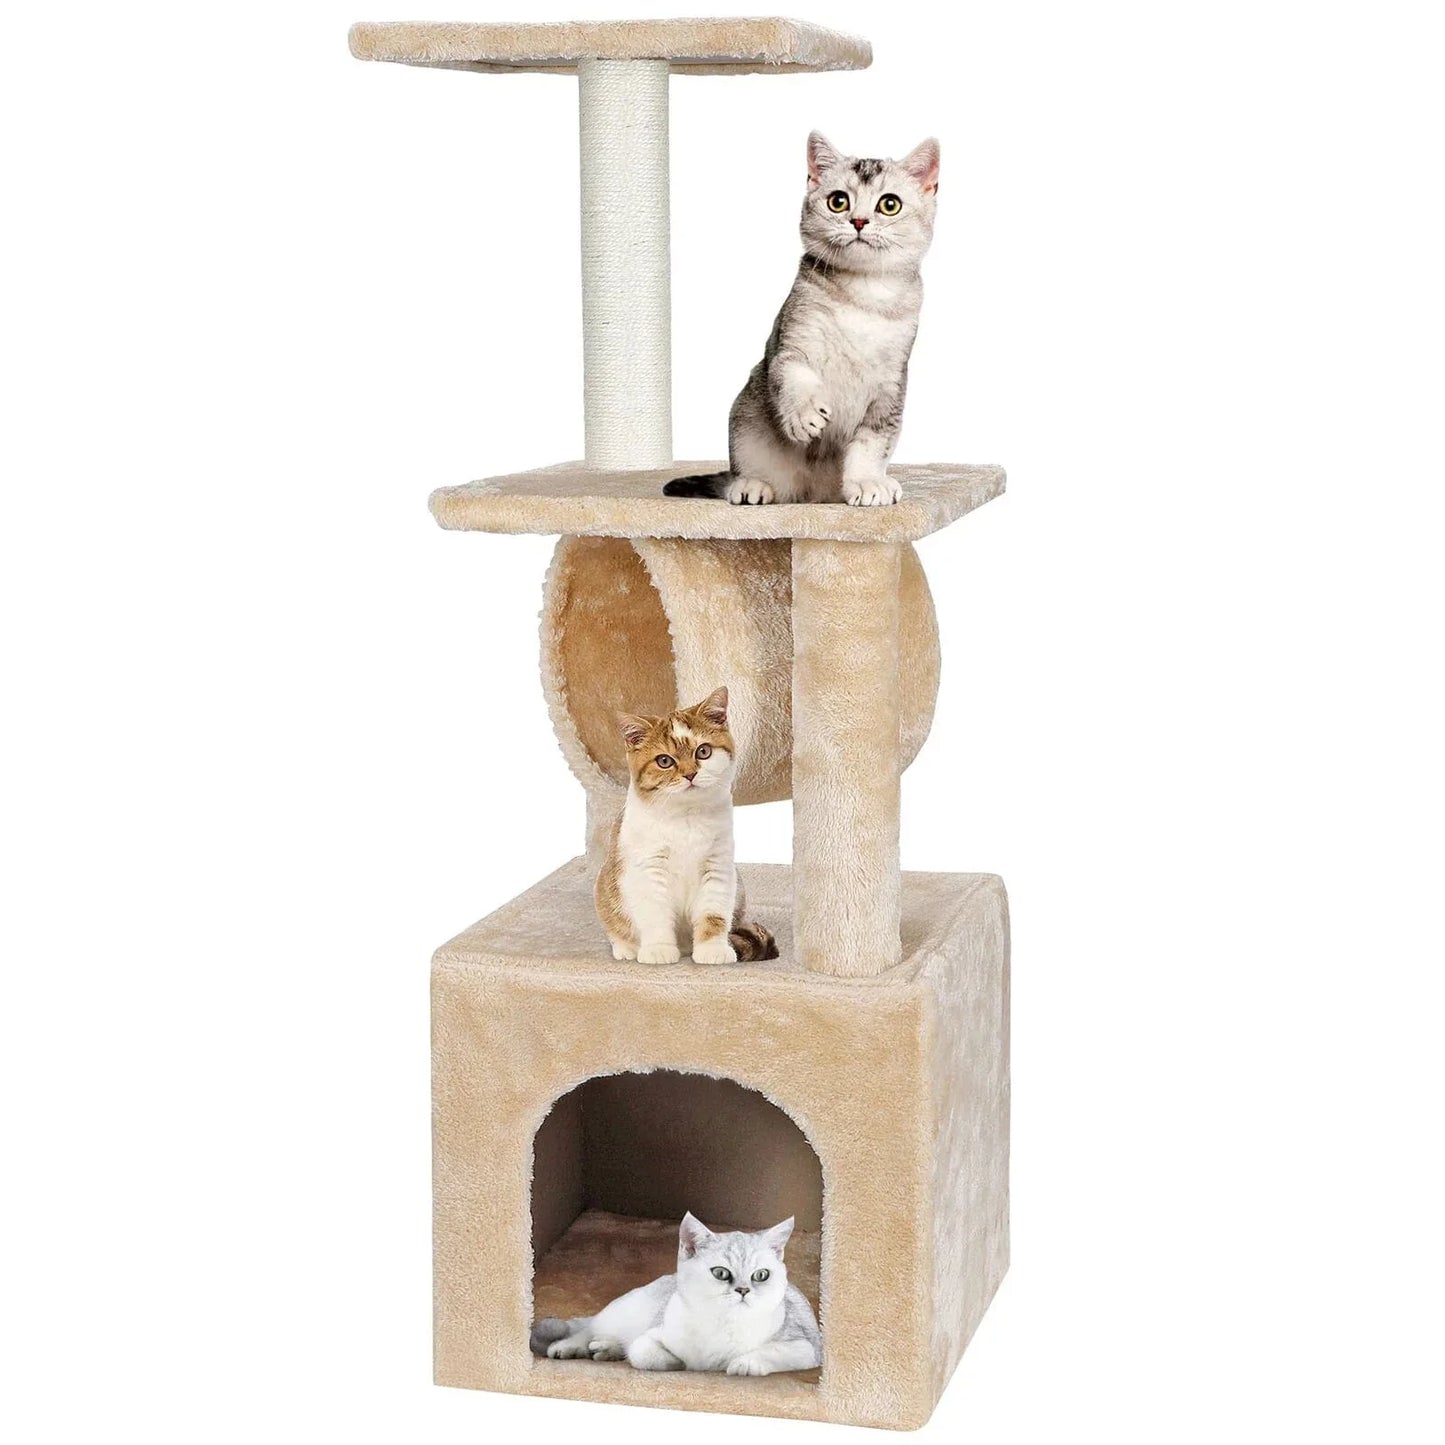 Zenstyle 36" Cat Tree Activity Climber Tower with Plush Perch and Sisal Post for Kittens, Pet Kitty Play House Furniture